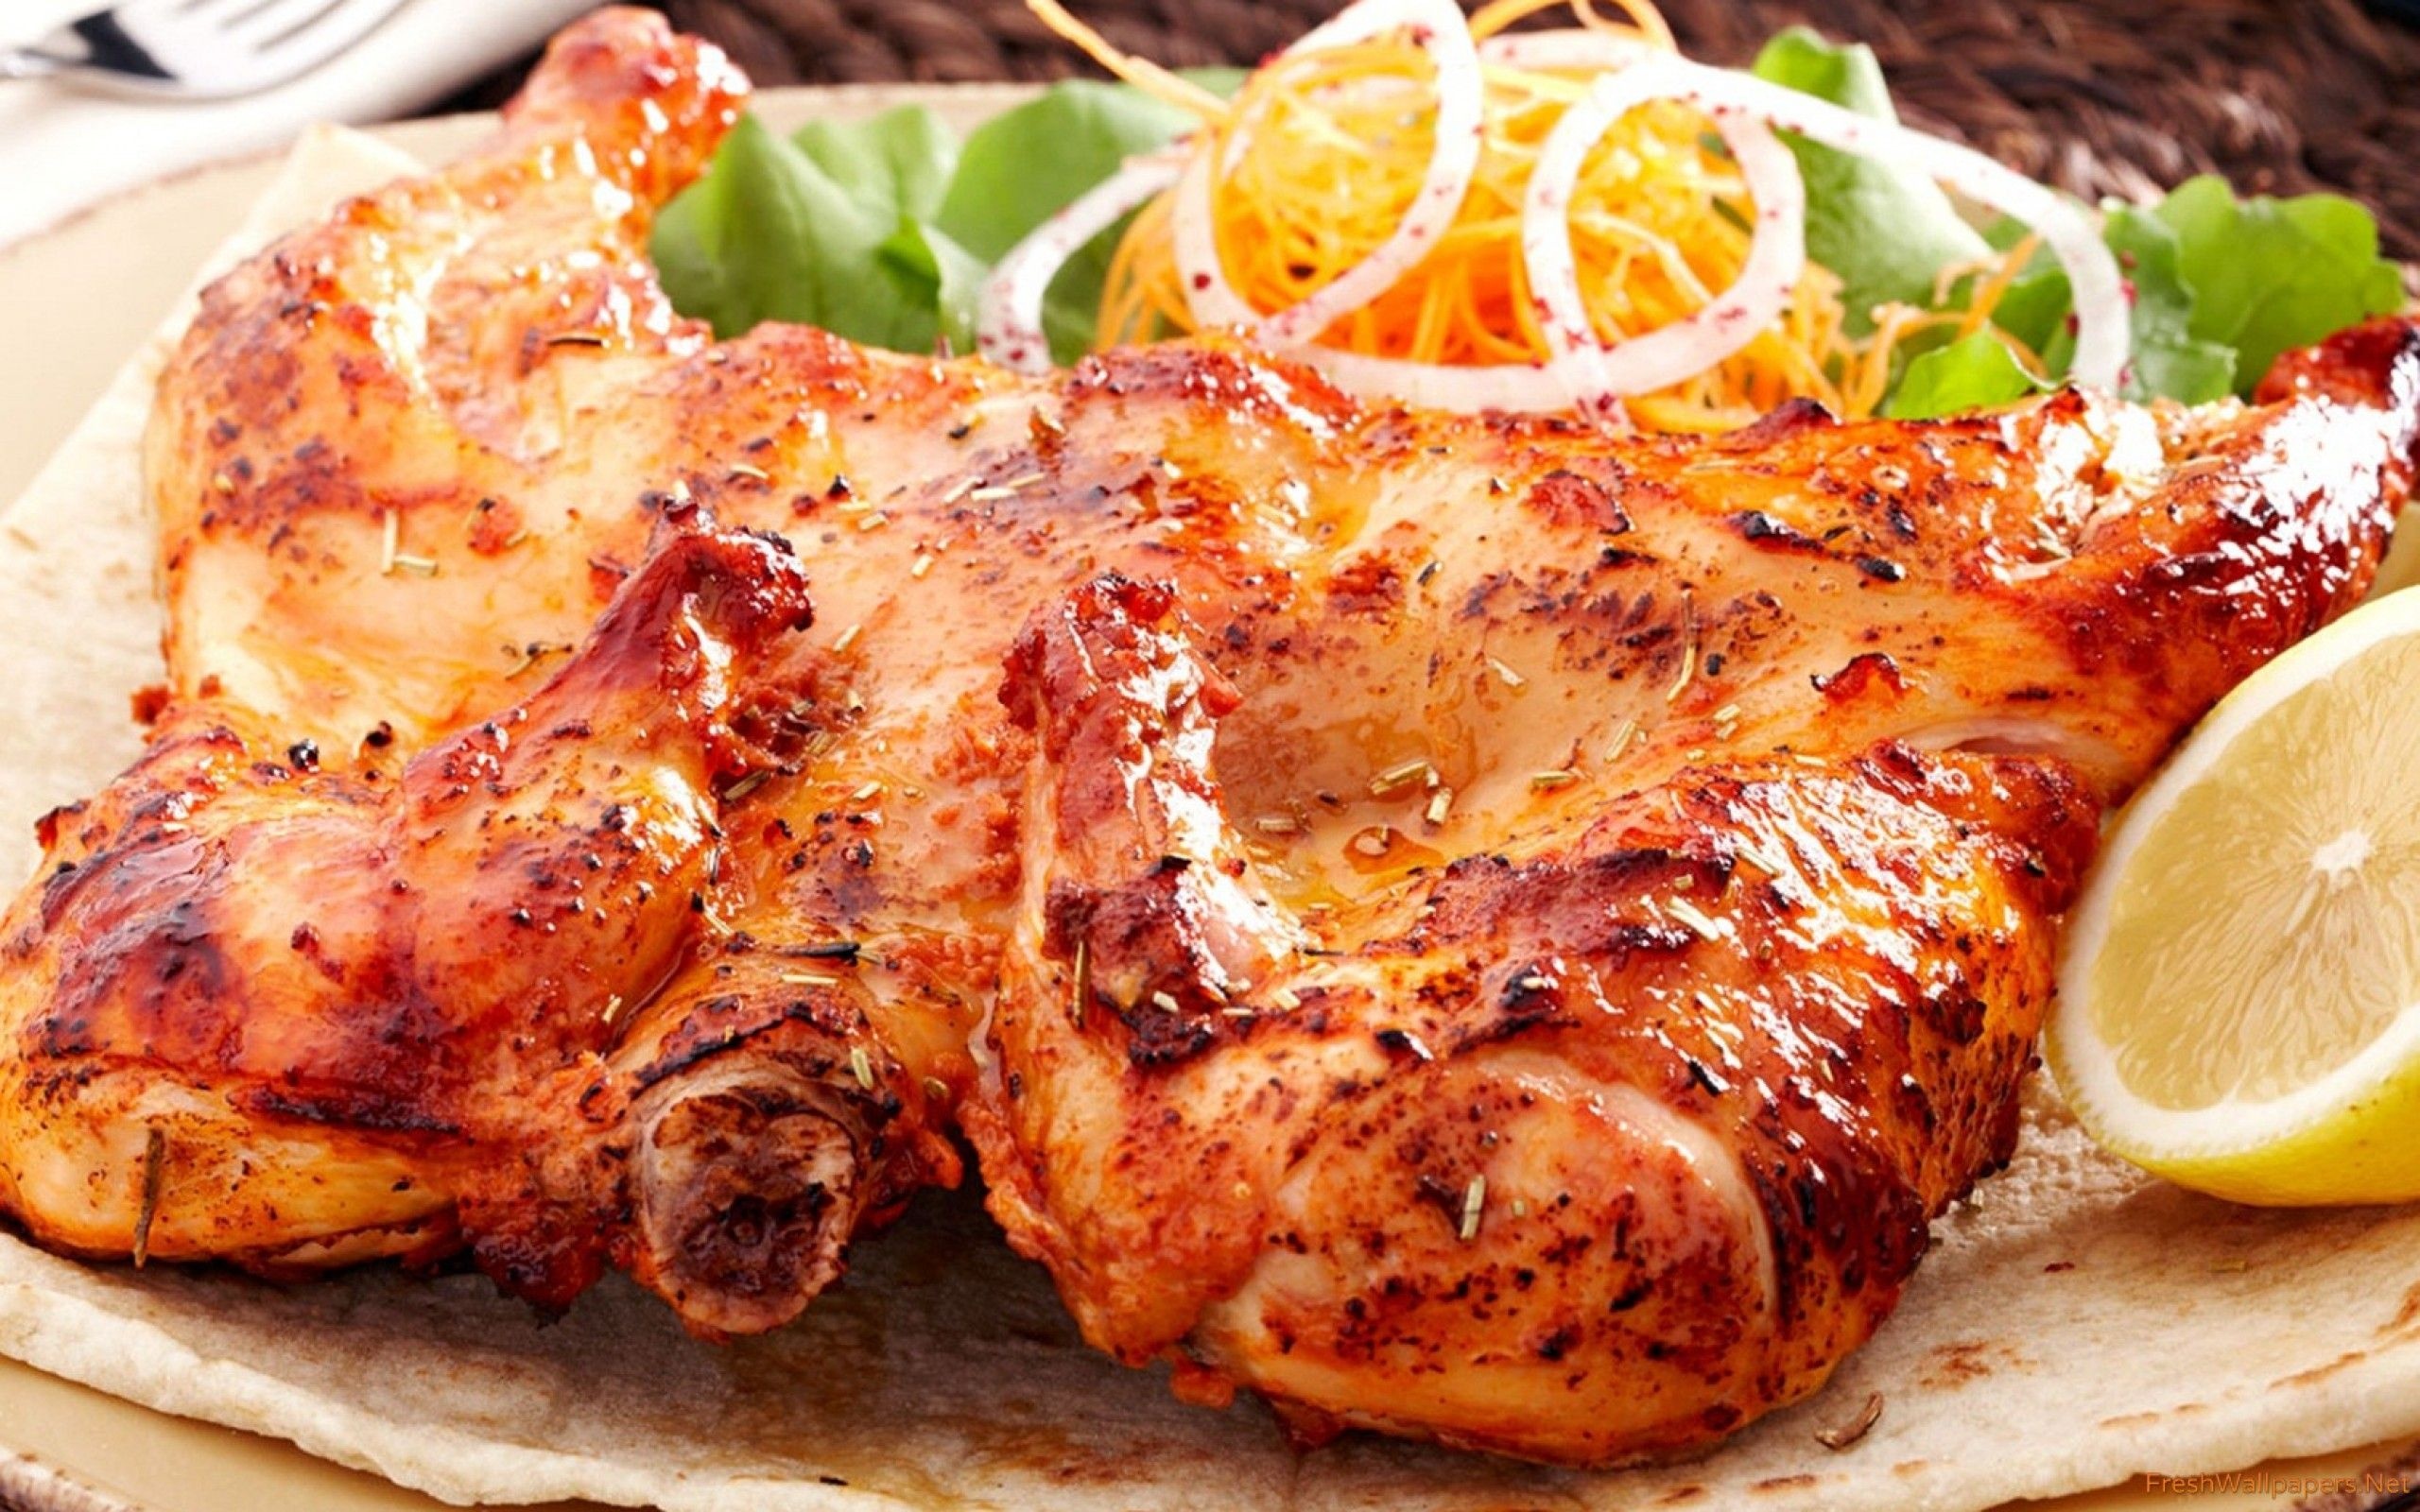 Grilled chicken image, Flame-grilled goodness, BBQ delicacy, Savory protein, 2560x1600 HD Desktop